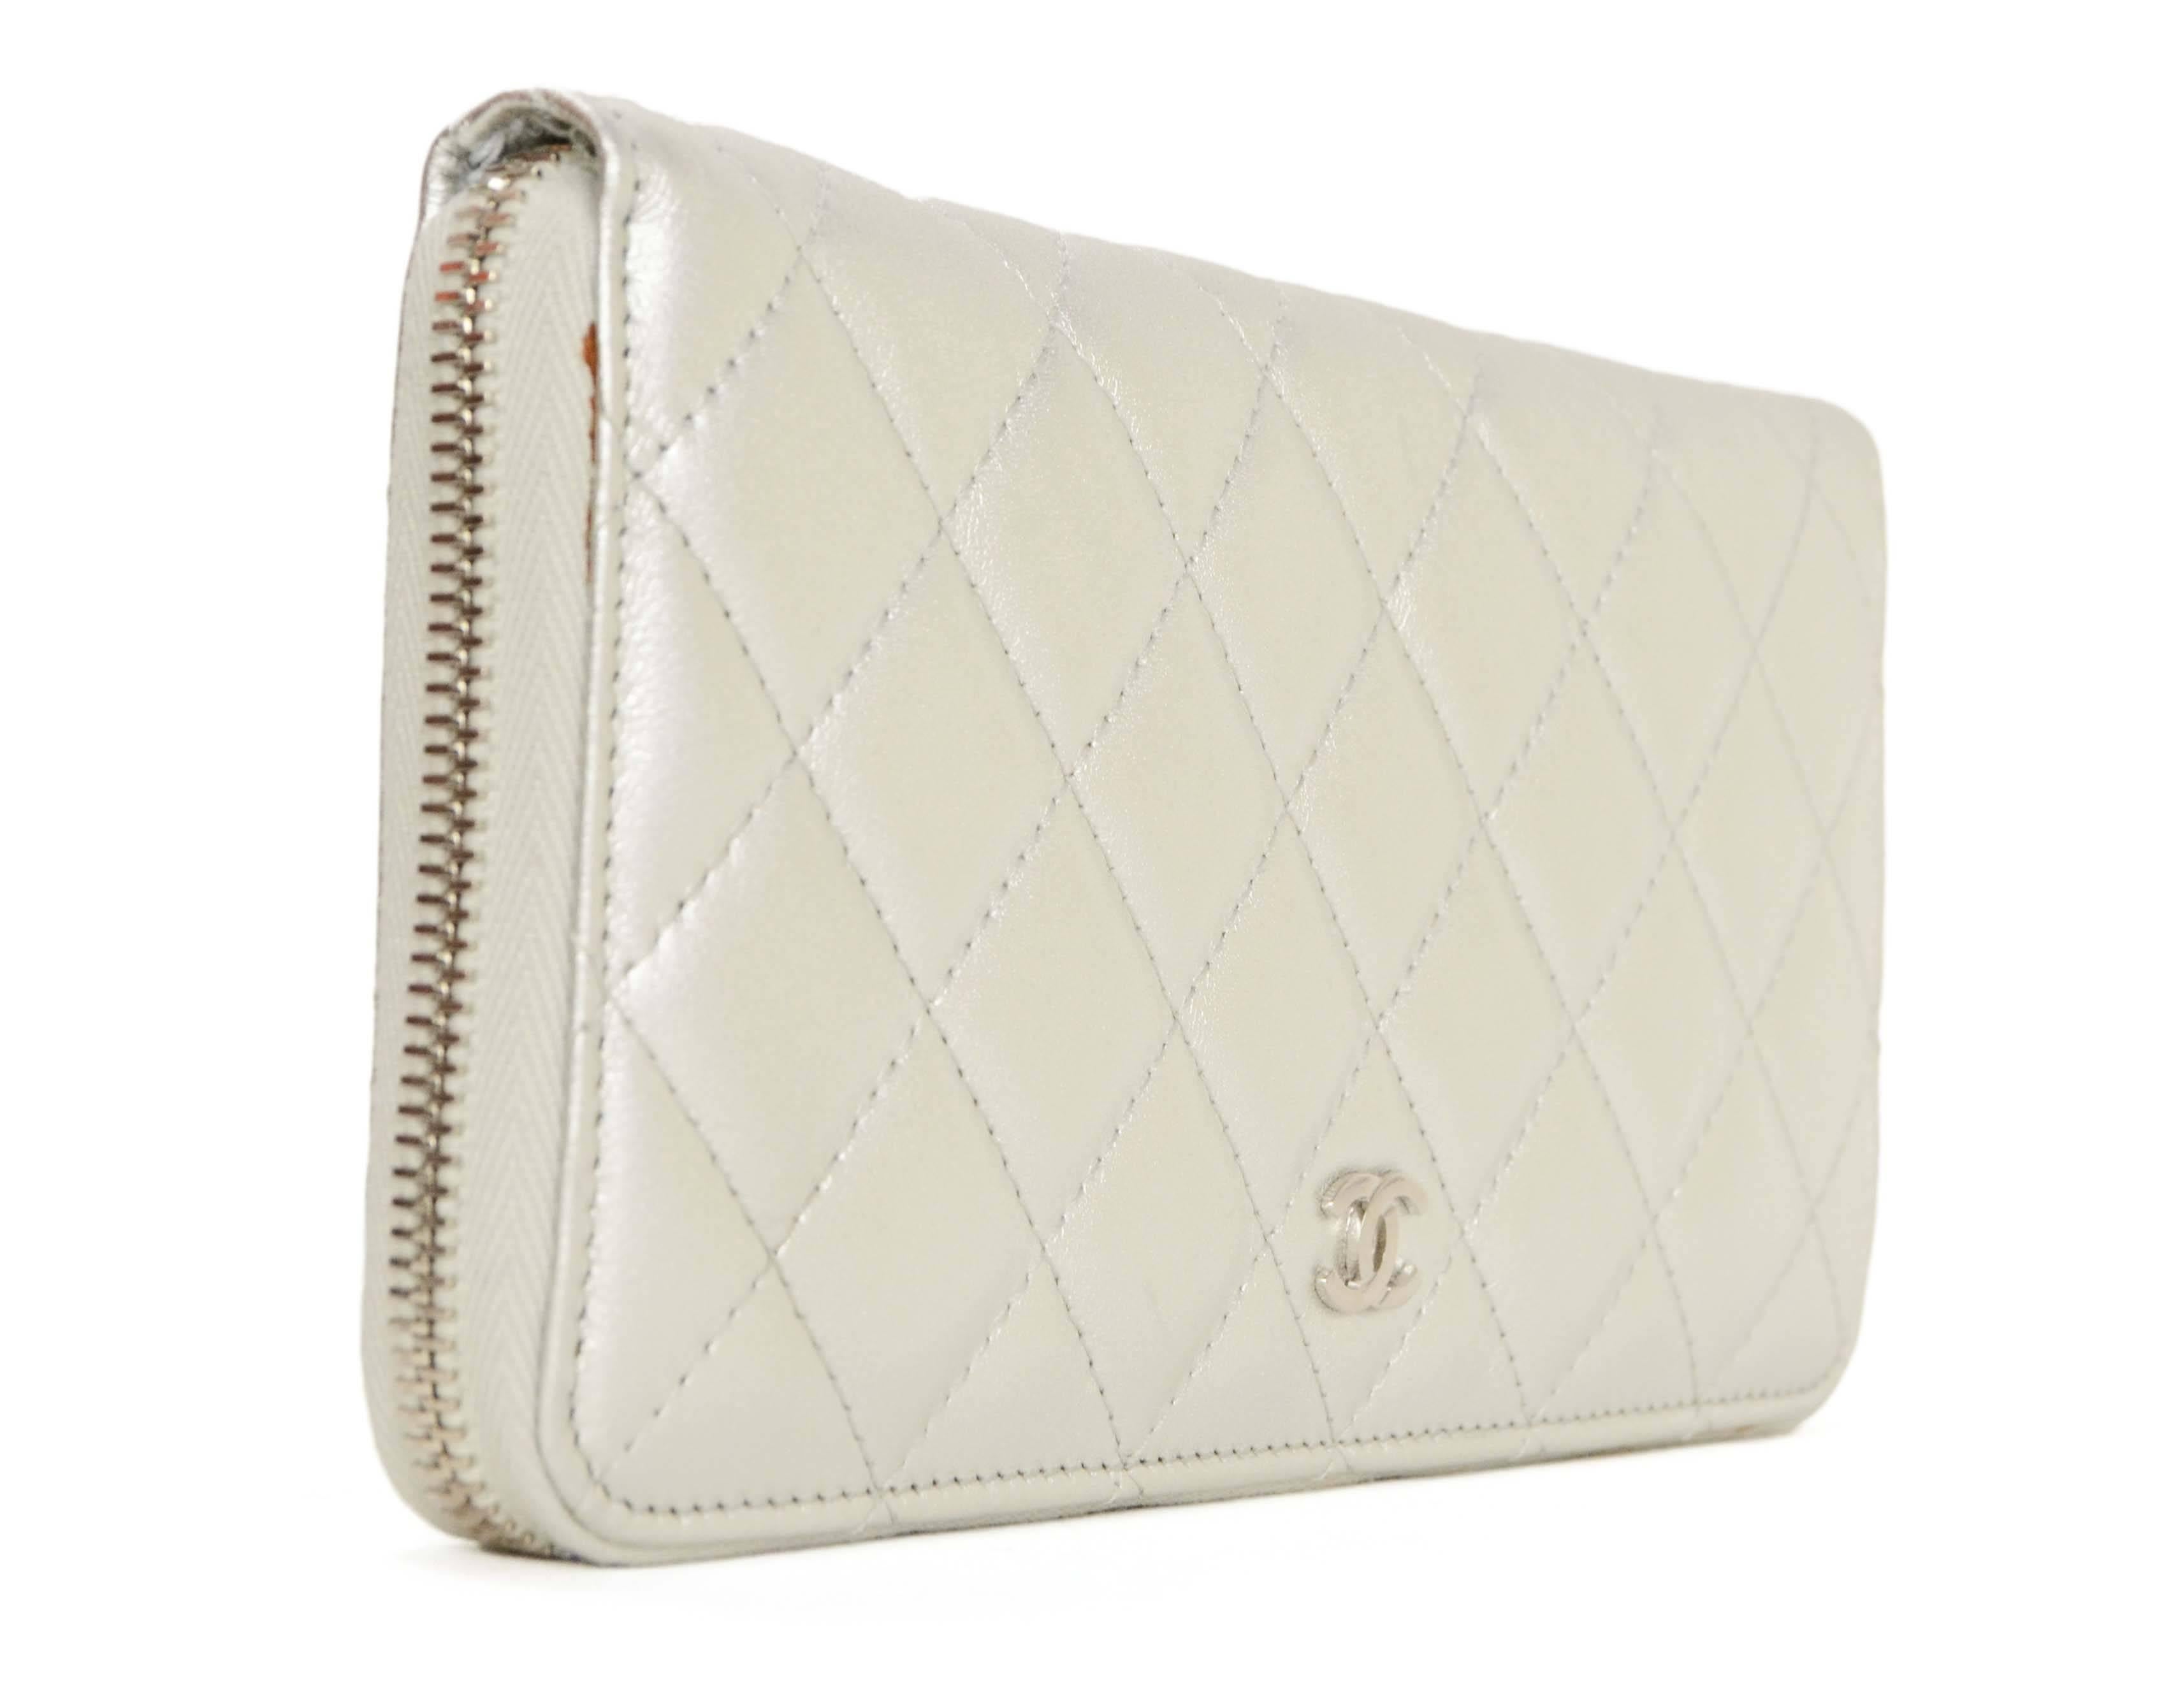 Chanel Silver Quilted Lambskin Zippy Wallet  
Features small silvertone CC on front
Made In: Italy
Year of Production: 2014
Color: Silver
Hardware: Silvertone
Materials: Lambskin
Lining: Grey grosgrain
Closure/Opening: Zip around